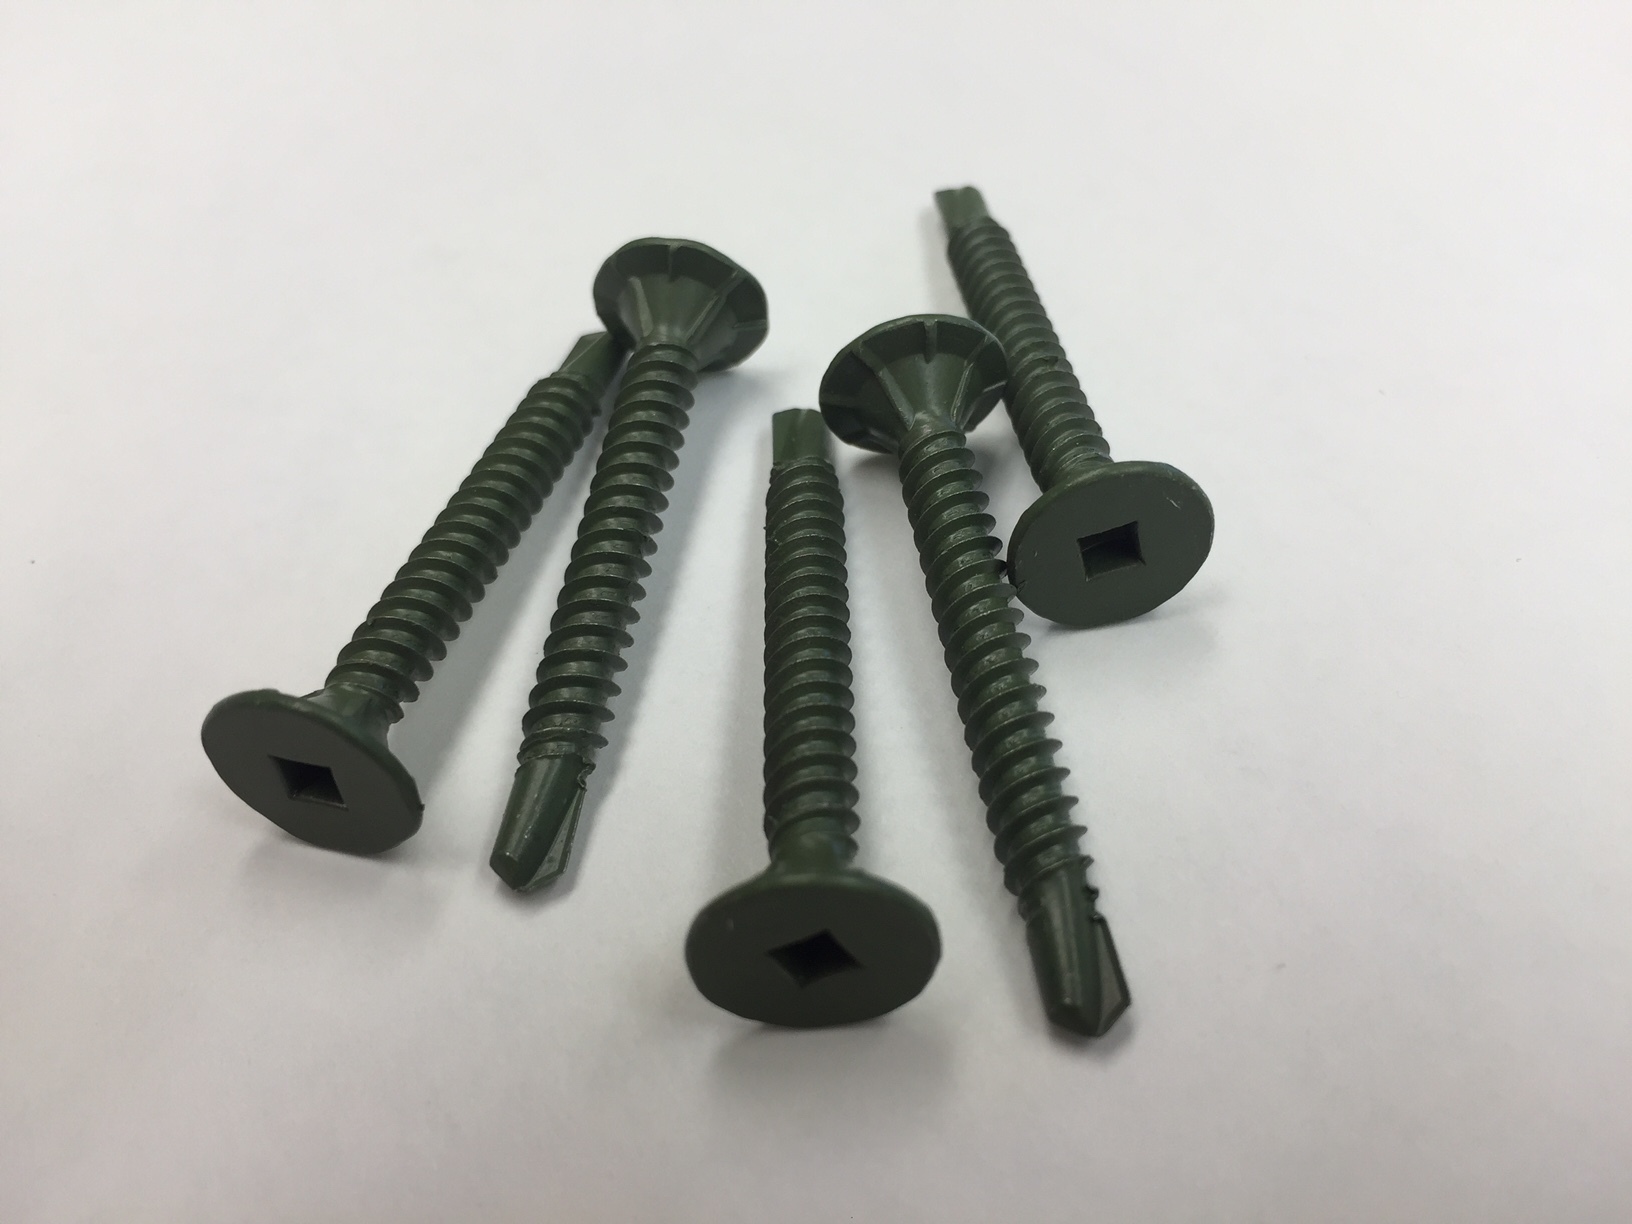 #10 x 1 5/8" Cement Board Screw with Self Drilling Point - 2500 each Cement Board Screws For Metal Studs